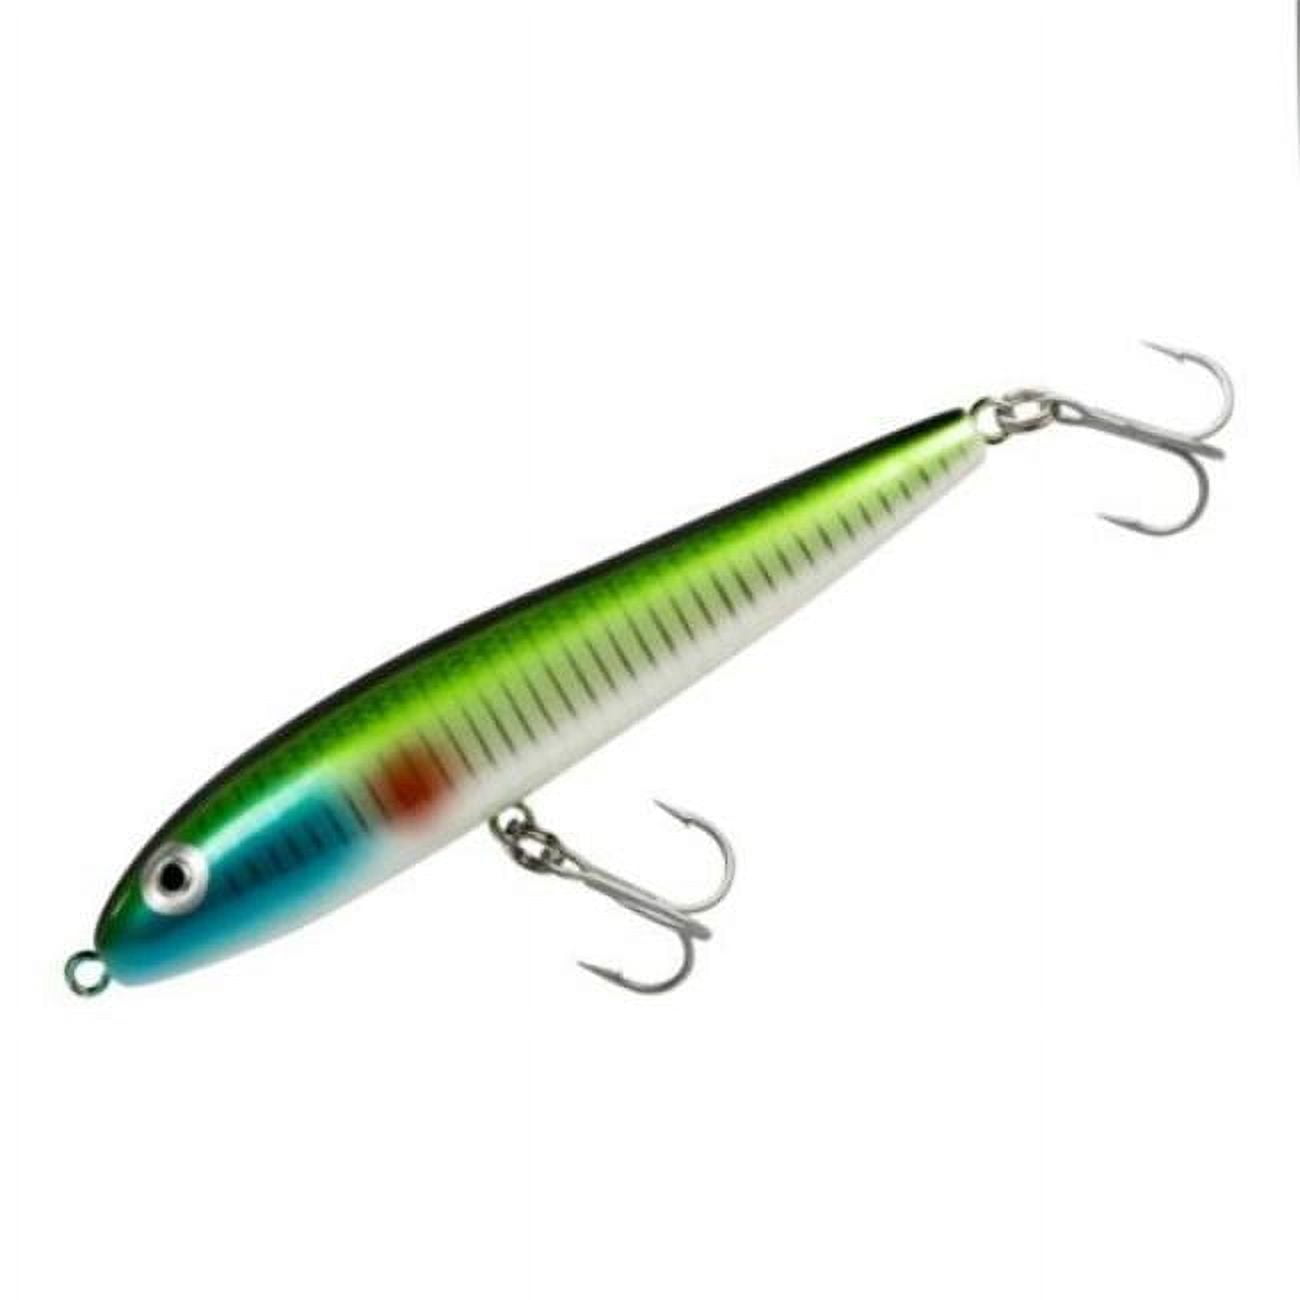 Brad's Extreme Kokanee Dodger Flasher Fishing Trolling Lure Choice of Colors